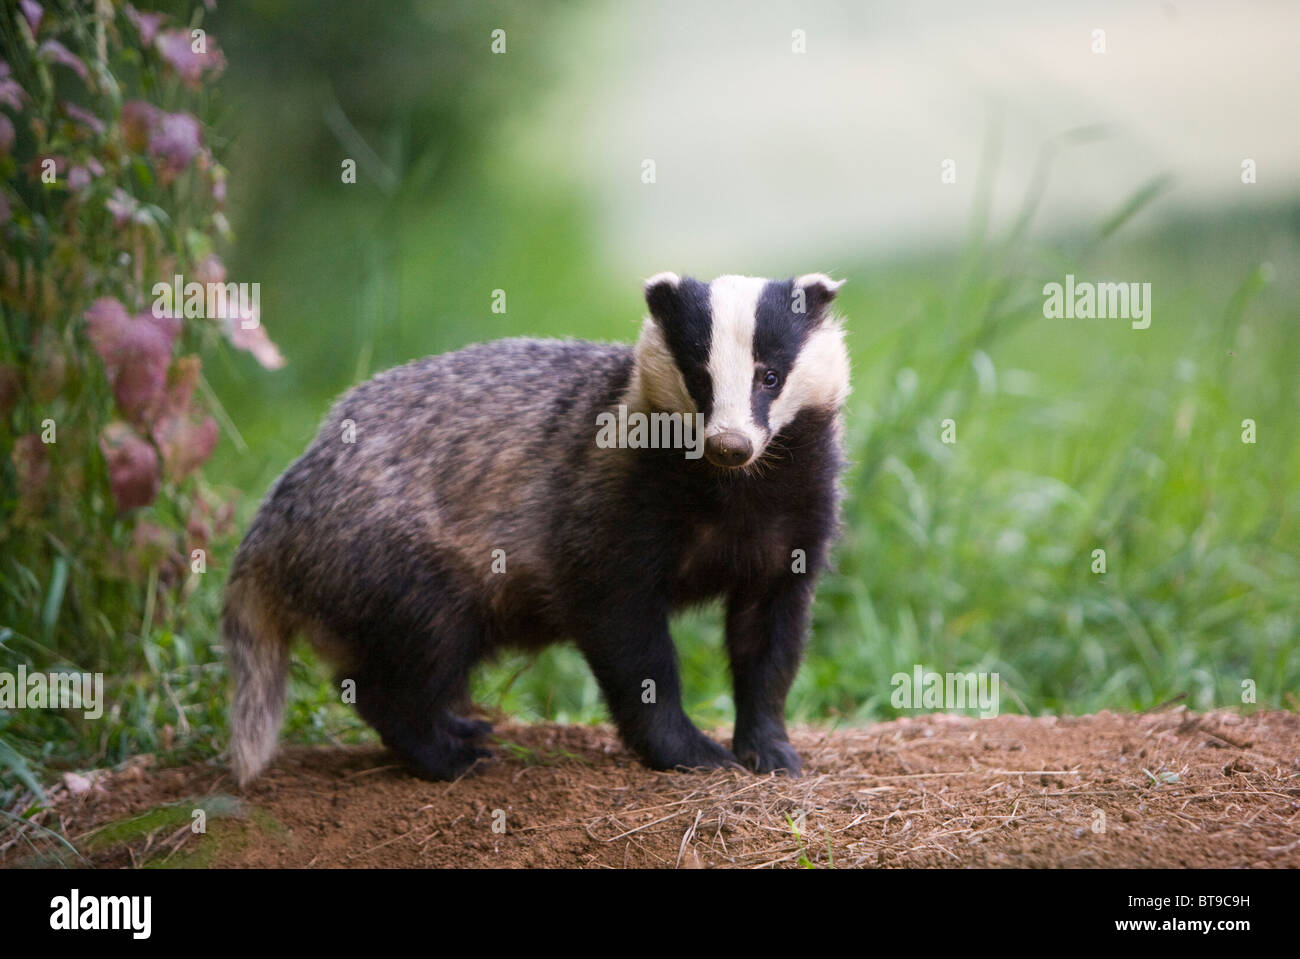 Badger (Meles meles) by the entrance to sett at the edge of a wood and a wheat field. Oxfordshire, England, June 2010. Stock Photo